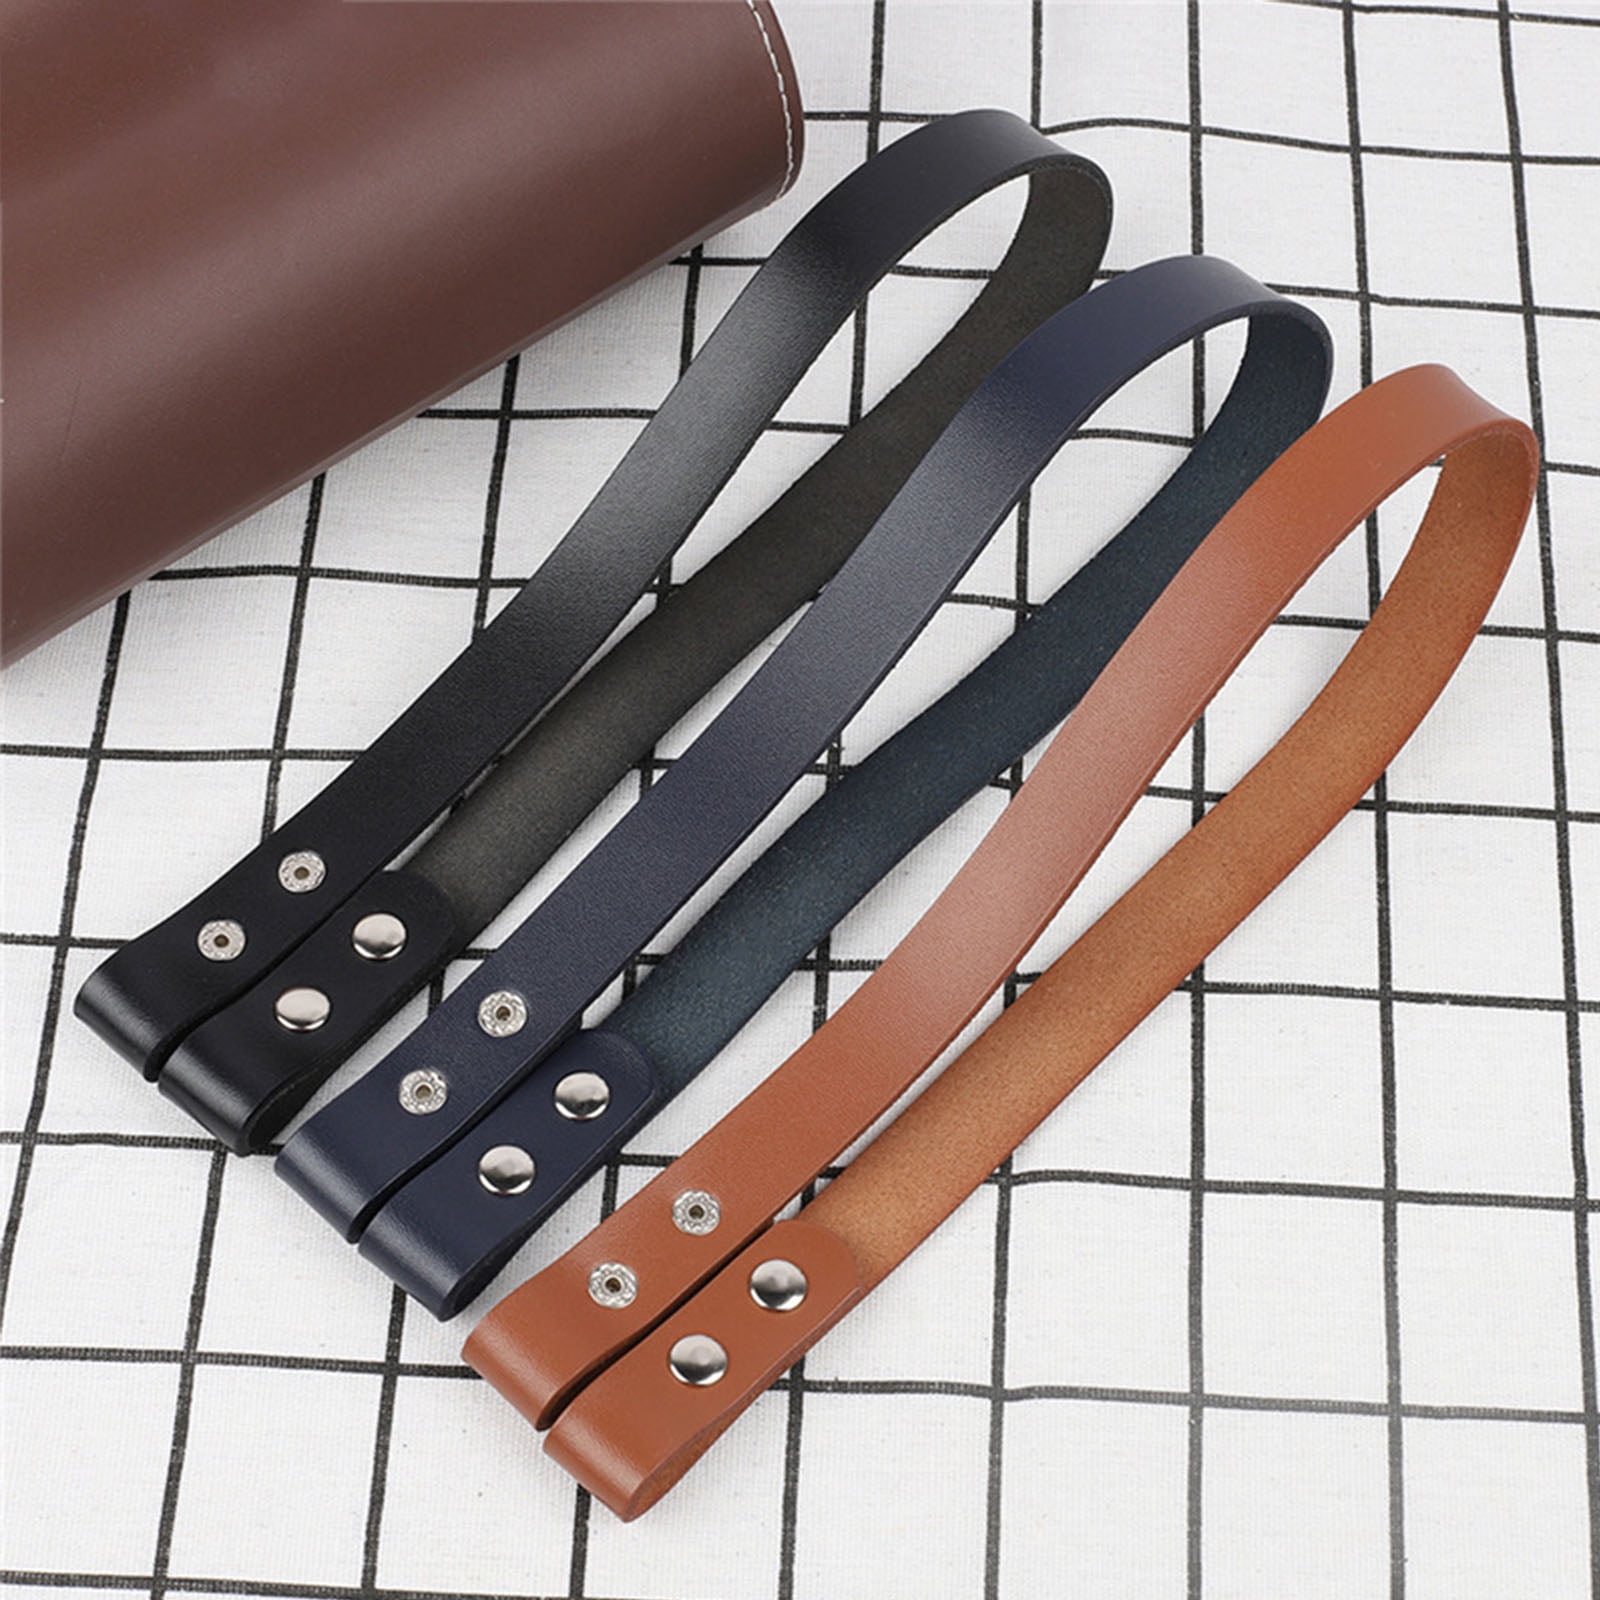 Bamboo Purse Handles Pair Of 12.5cm U Shaped Replacement Amazon Handbags  Below 500 Handle Accessories For Bag Making Wholesale Item #230818 From  Diao06, $9.38 | DHgate.Com